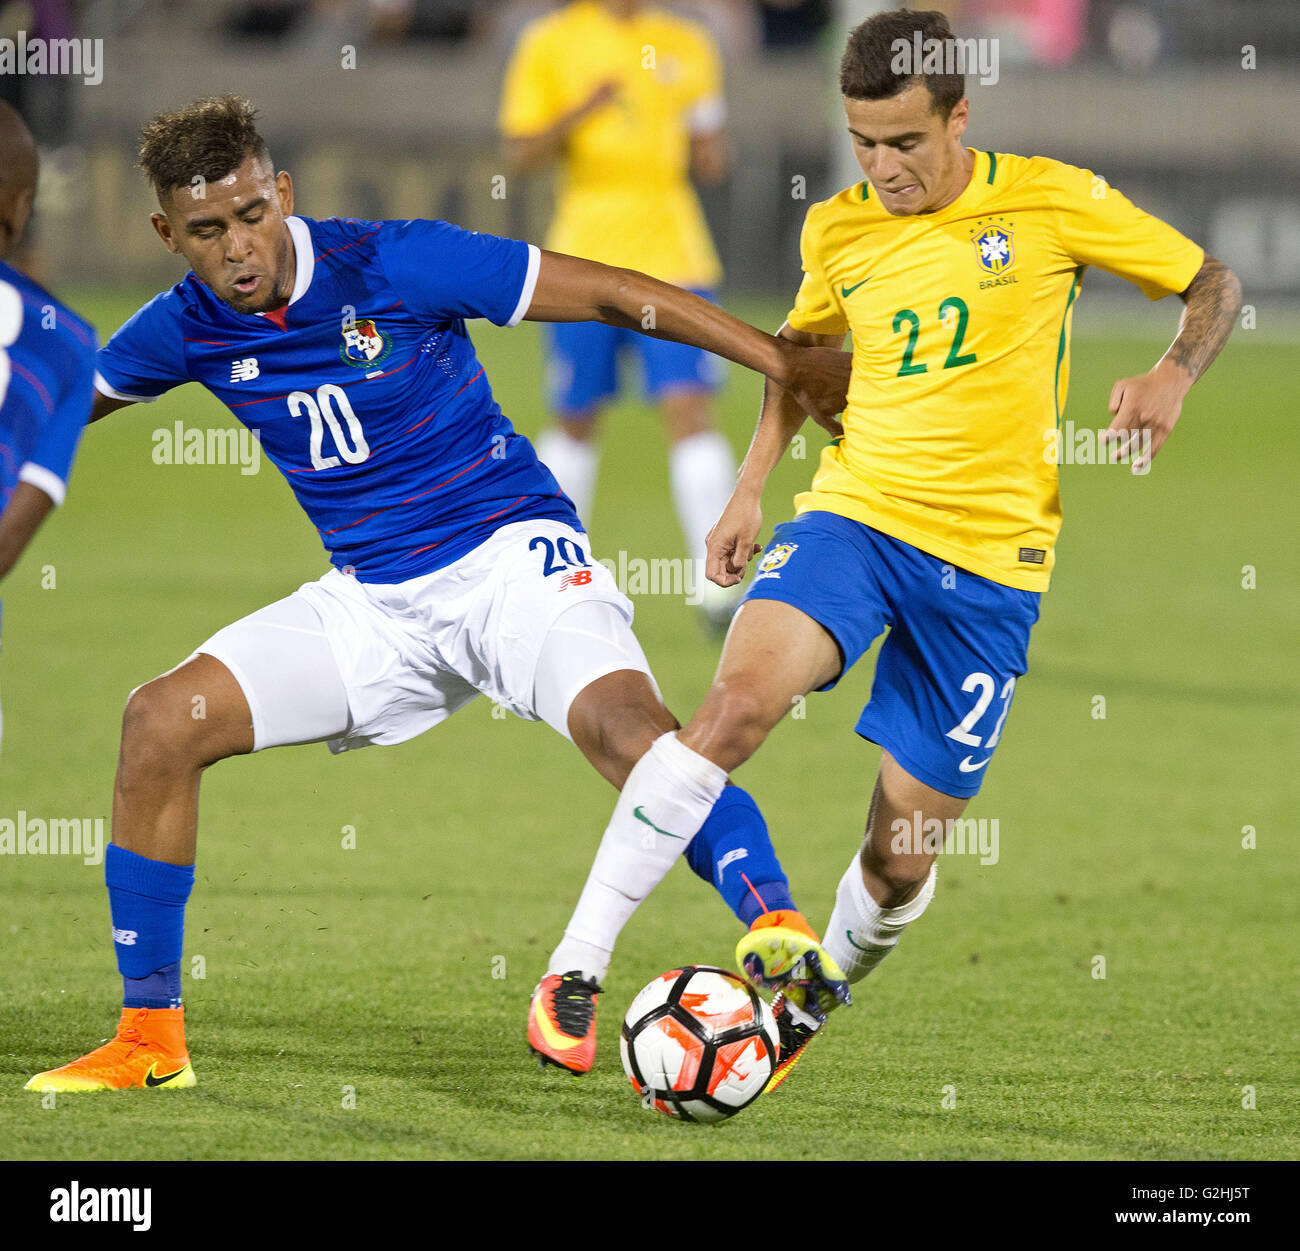 Commerce City, Colorado, USA. 29th May, 2016. Brazil MF PHILIPPE COUTINHO, right, battles for control of the ball with Panama MF ANIBAL GODOY, left, during a friendly match against Panama before the Copa de Oro at Dicks Sporting Goods Park Sunday Evening. Brazil beats Panama 2-0. © Hector Acevedo/ZUMA Wire/Alamy Live News Stock Photo